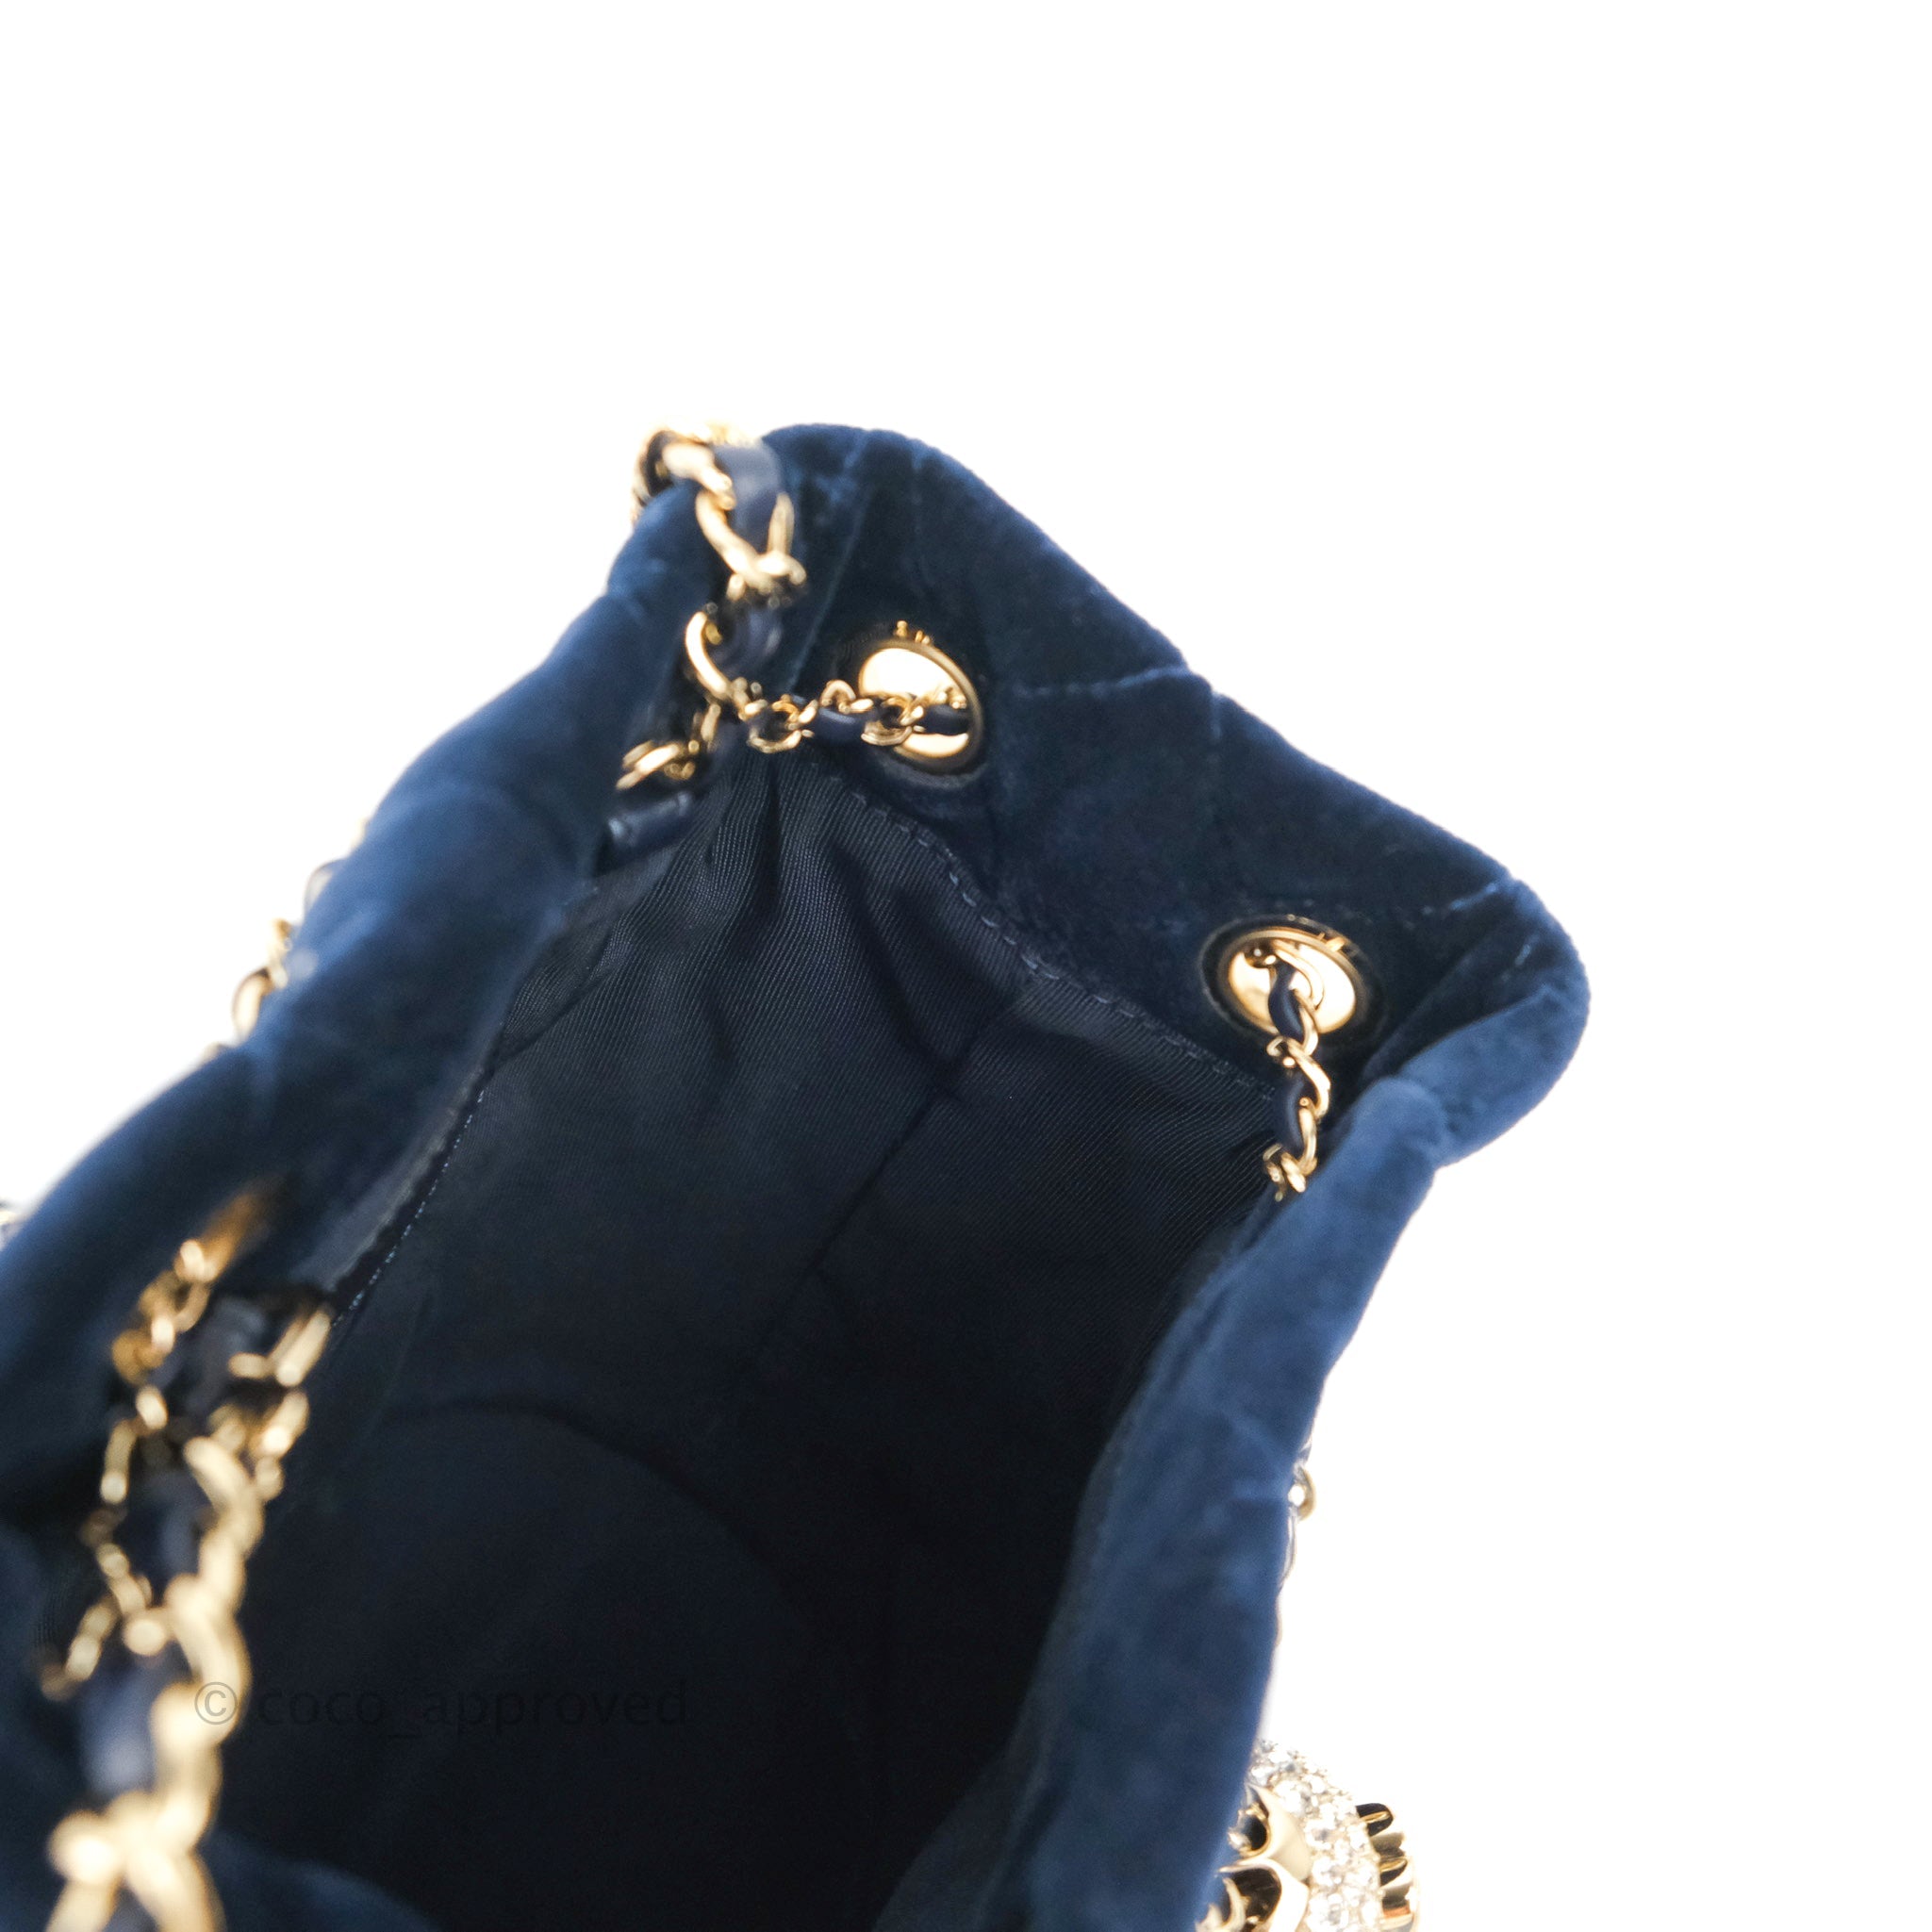 Chanel Quilted Crystal Pearl Crush Drawstring Bucket Bag Navy Velvet G –  Coco Approved Studio